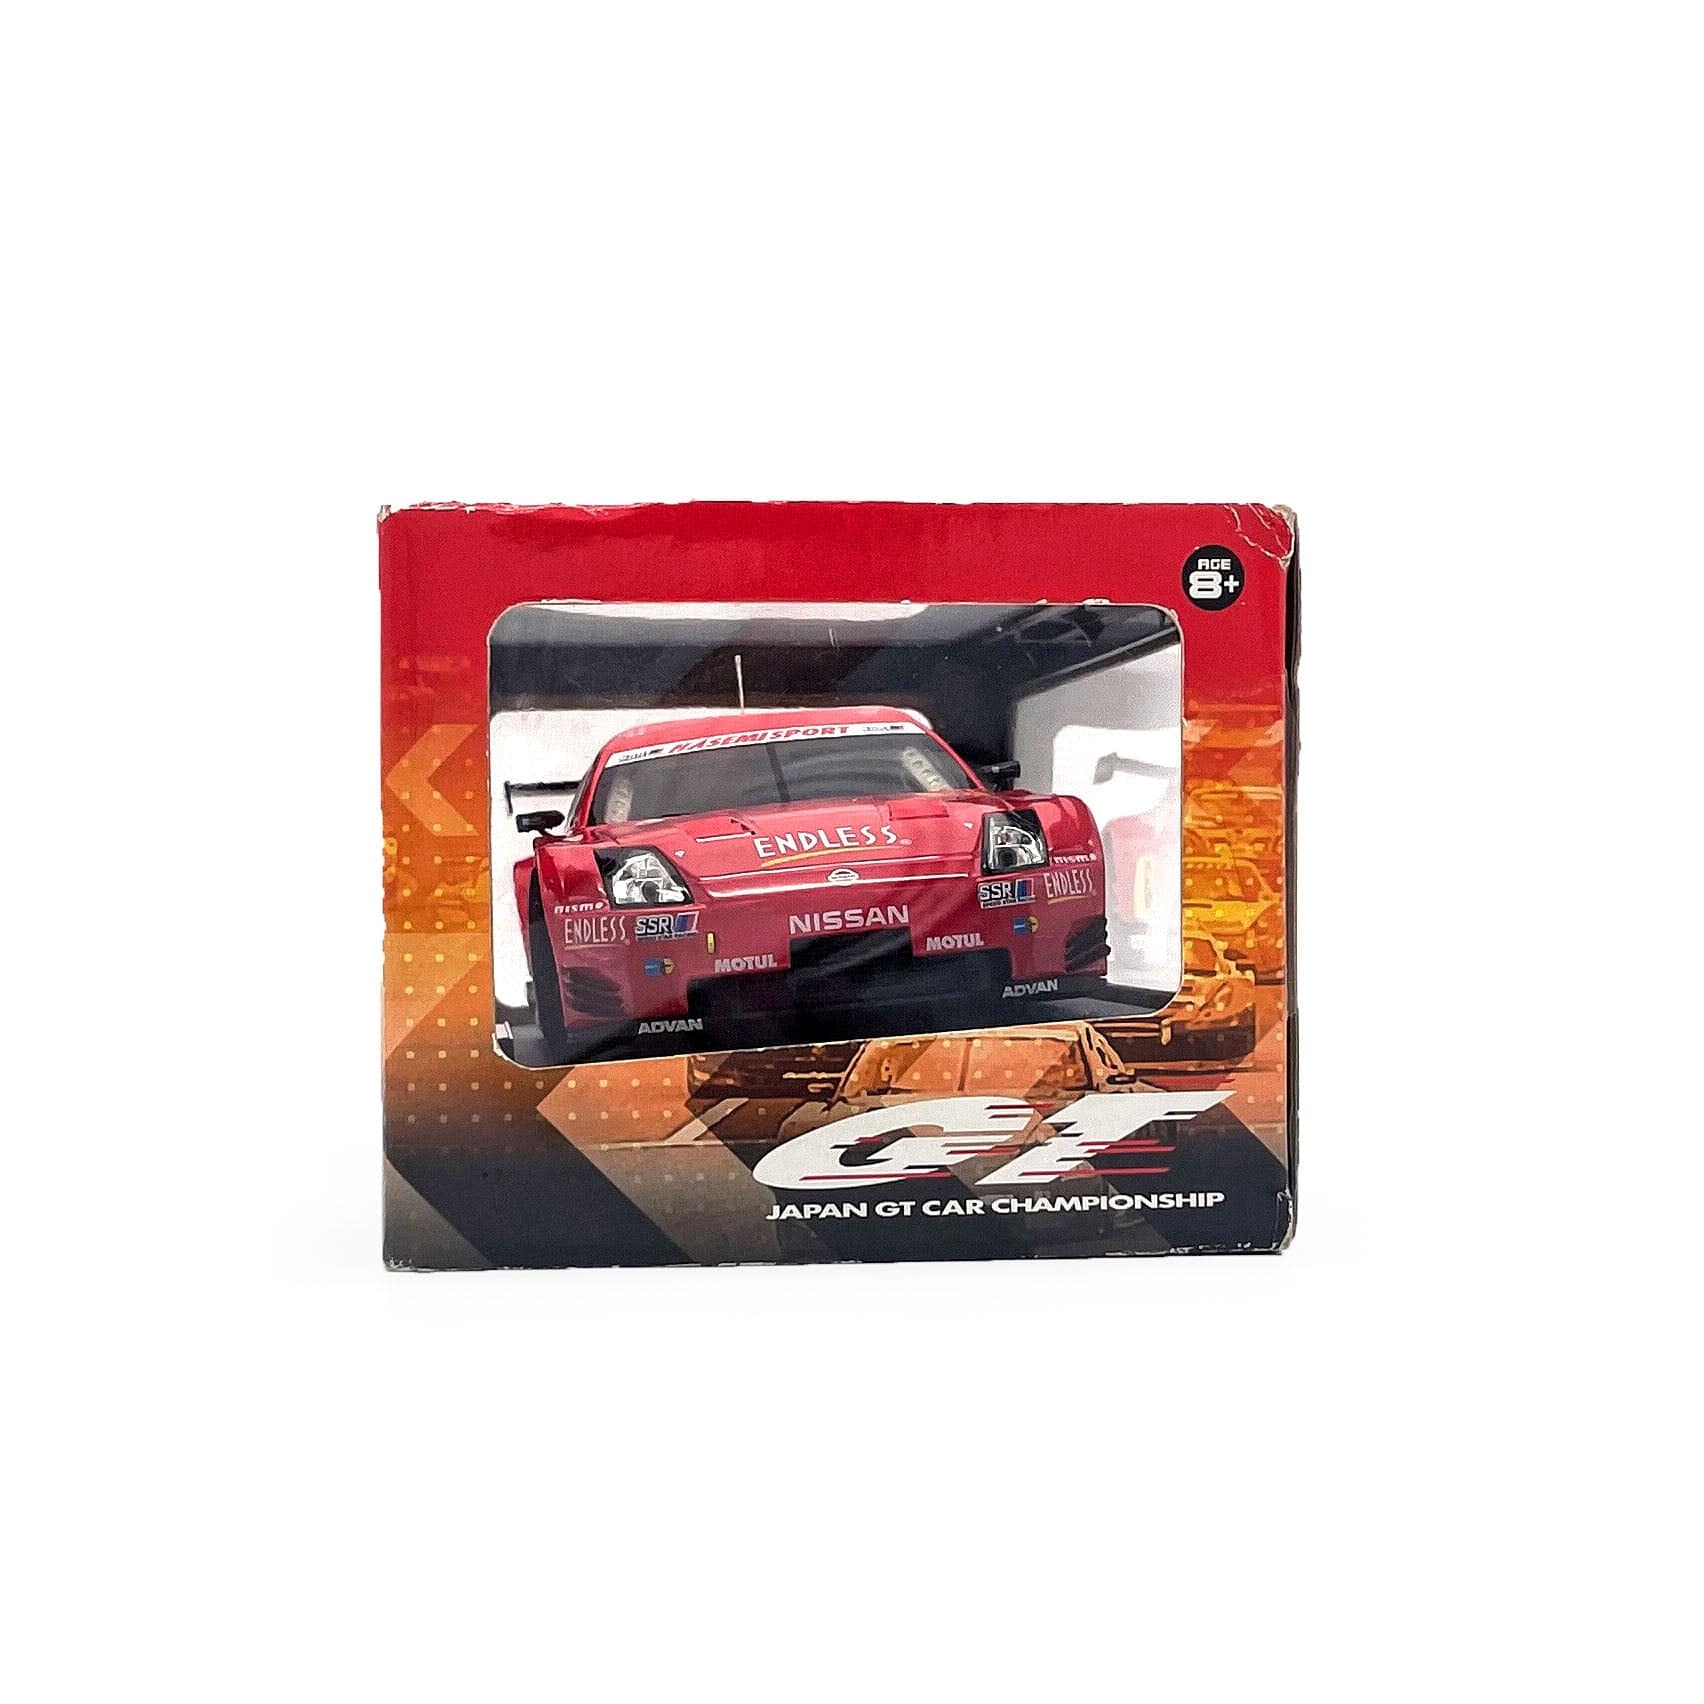 Rare Muscle Machines Japan GT Car Hasemisport Endless Z Diecast 1 